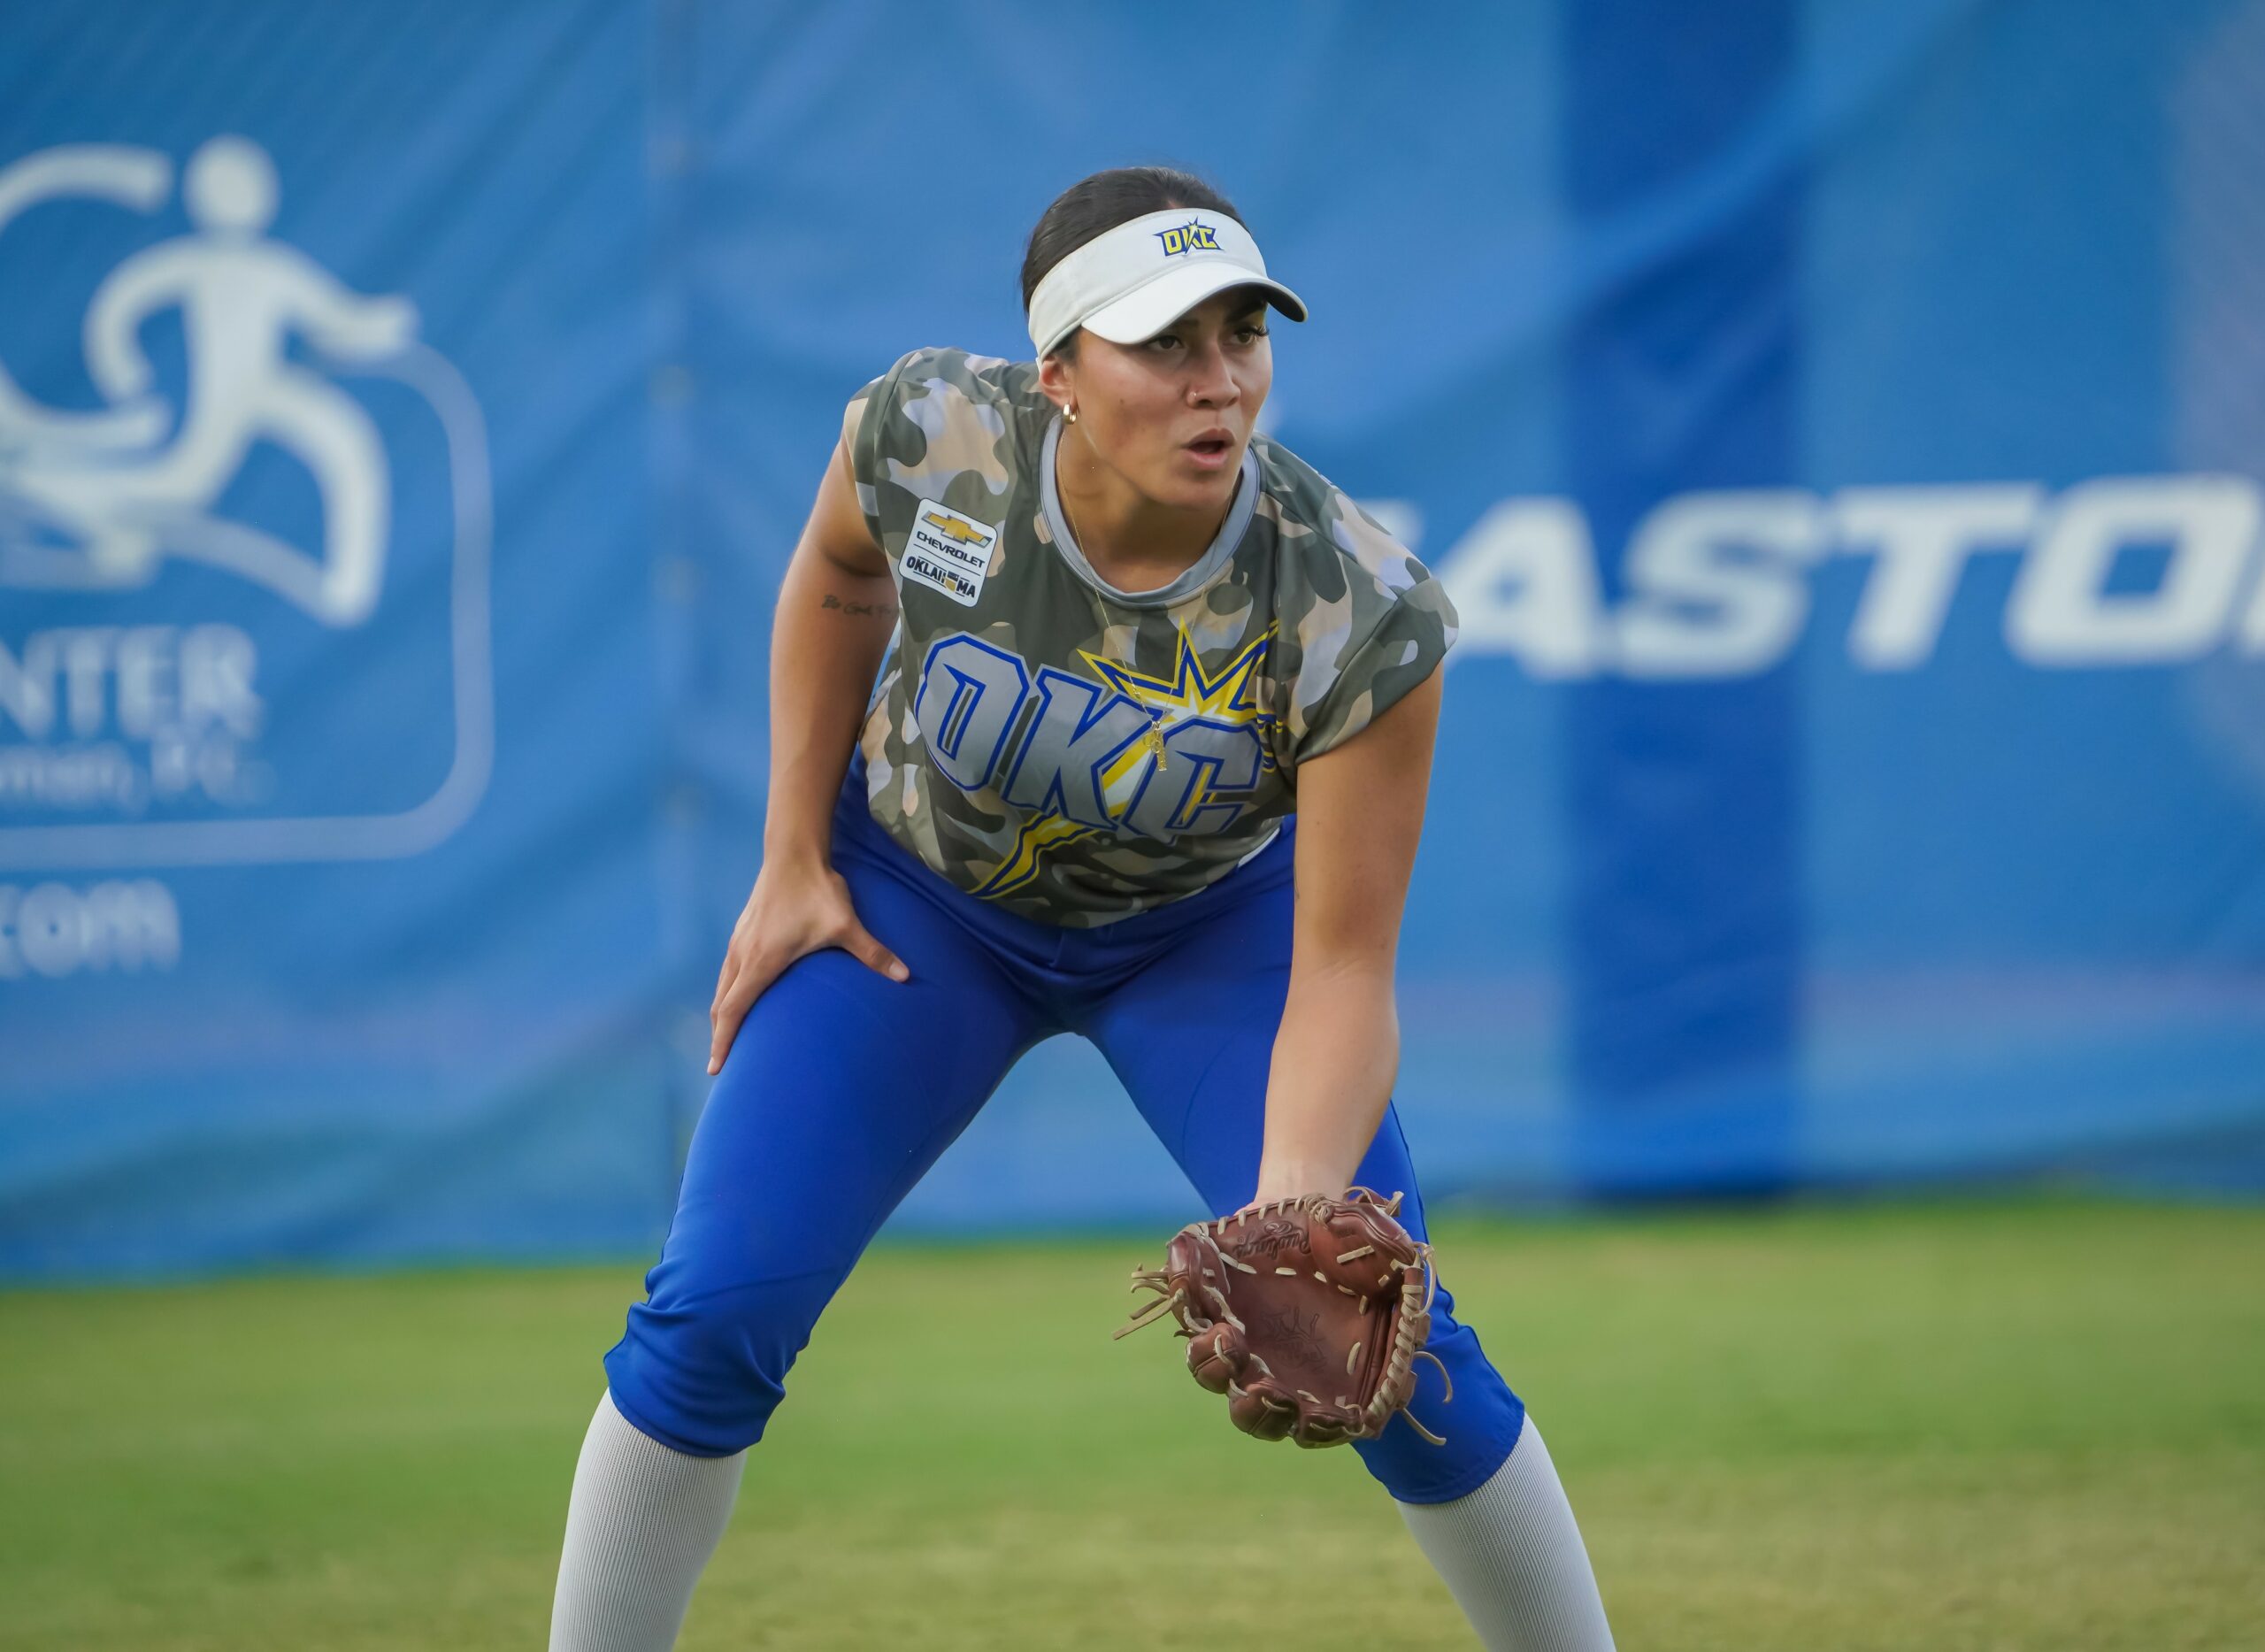 Chloe Malau’ulu is about to start her second season with the Oklahoma City Spark. She has worked several Rookie League Foundation Play Ball events since arriving in OKC (photo courtesy of the OKC Spark).